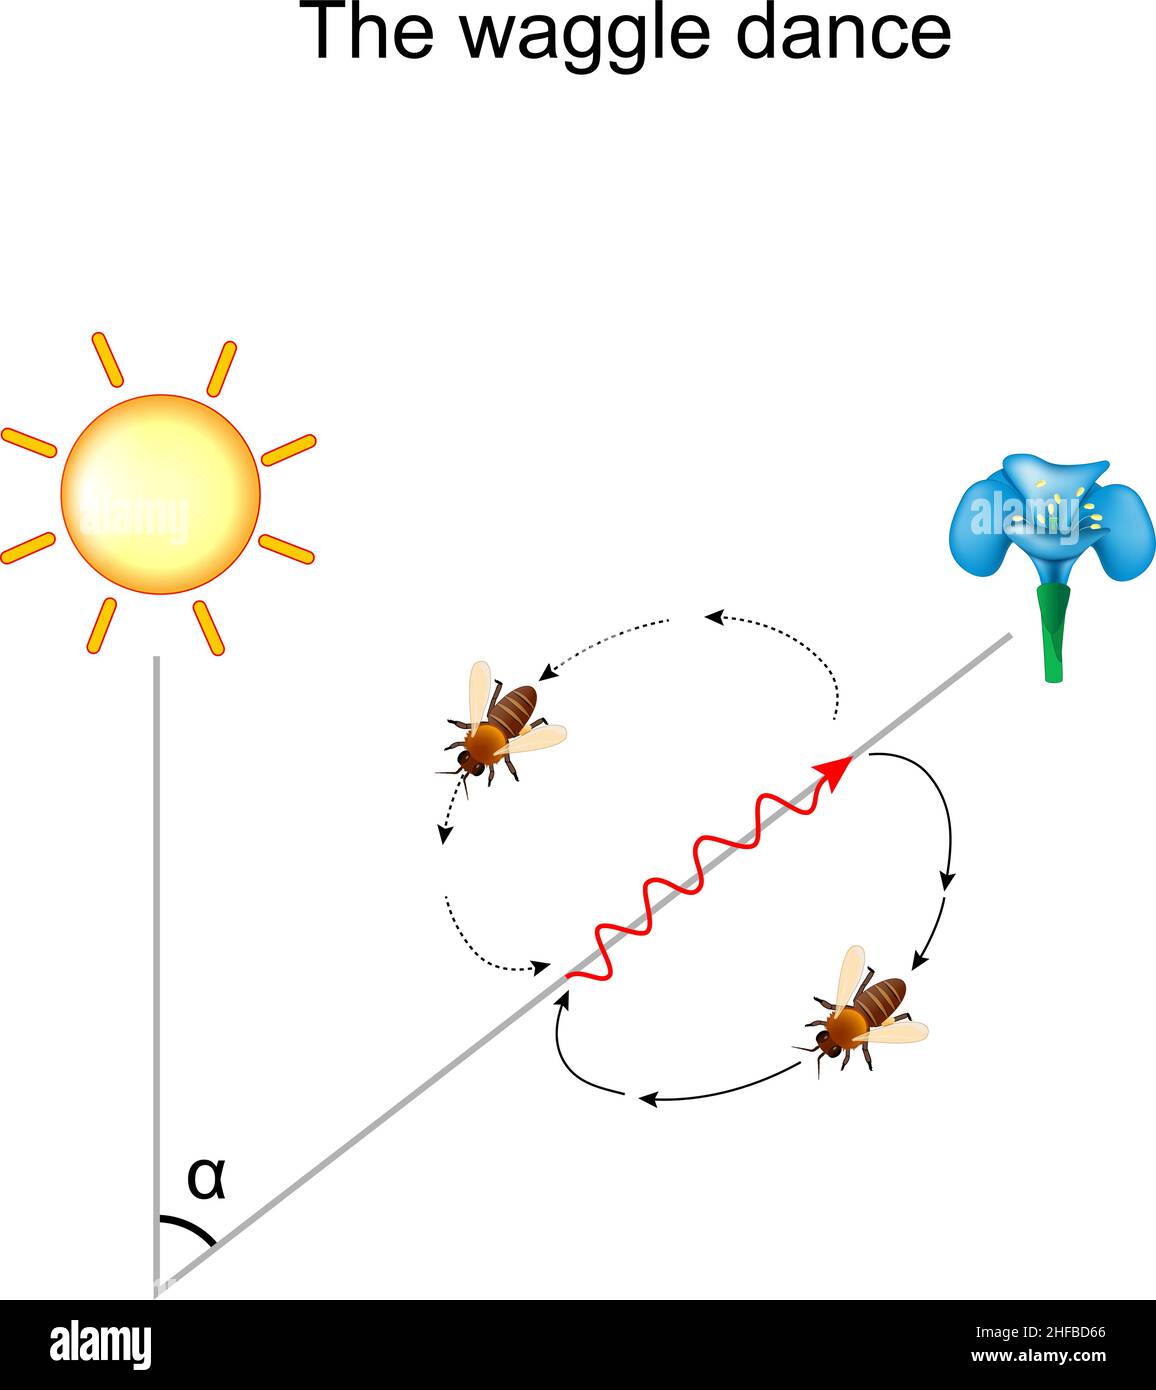 Waggle dance of the honeybee. Bee shares information about the direction and distance to flowers with nectar and pollen, to water sources, or to new n Stock Vector